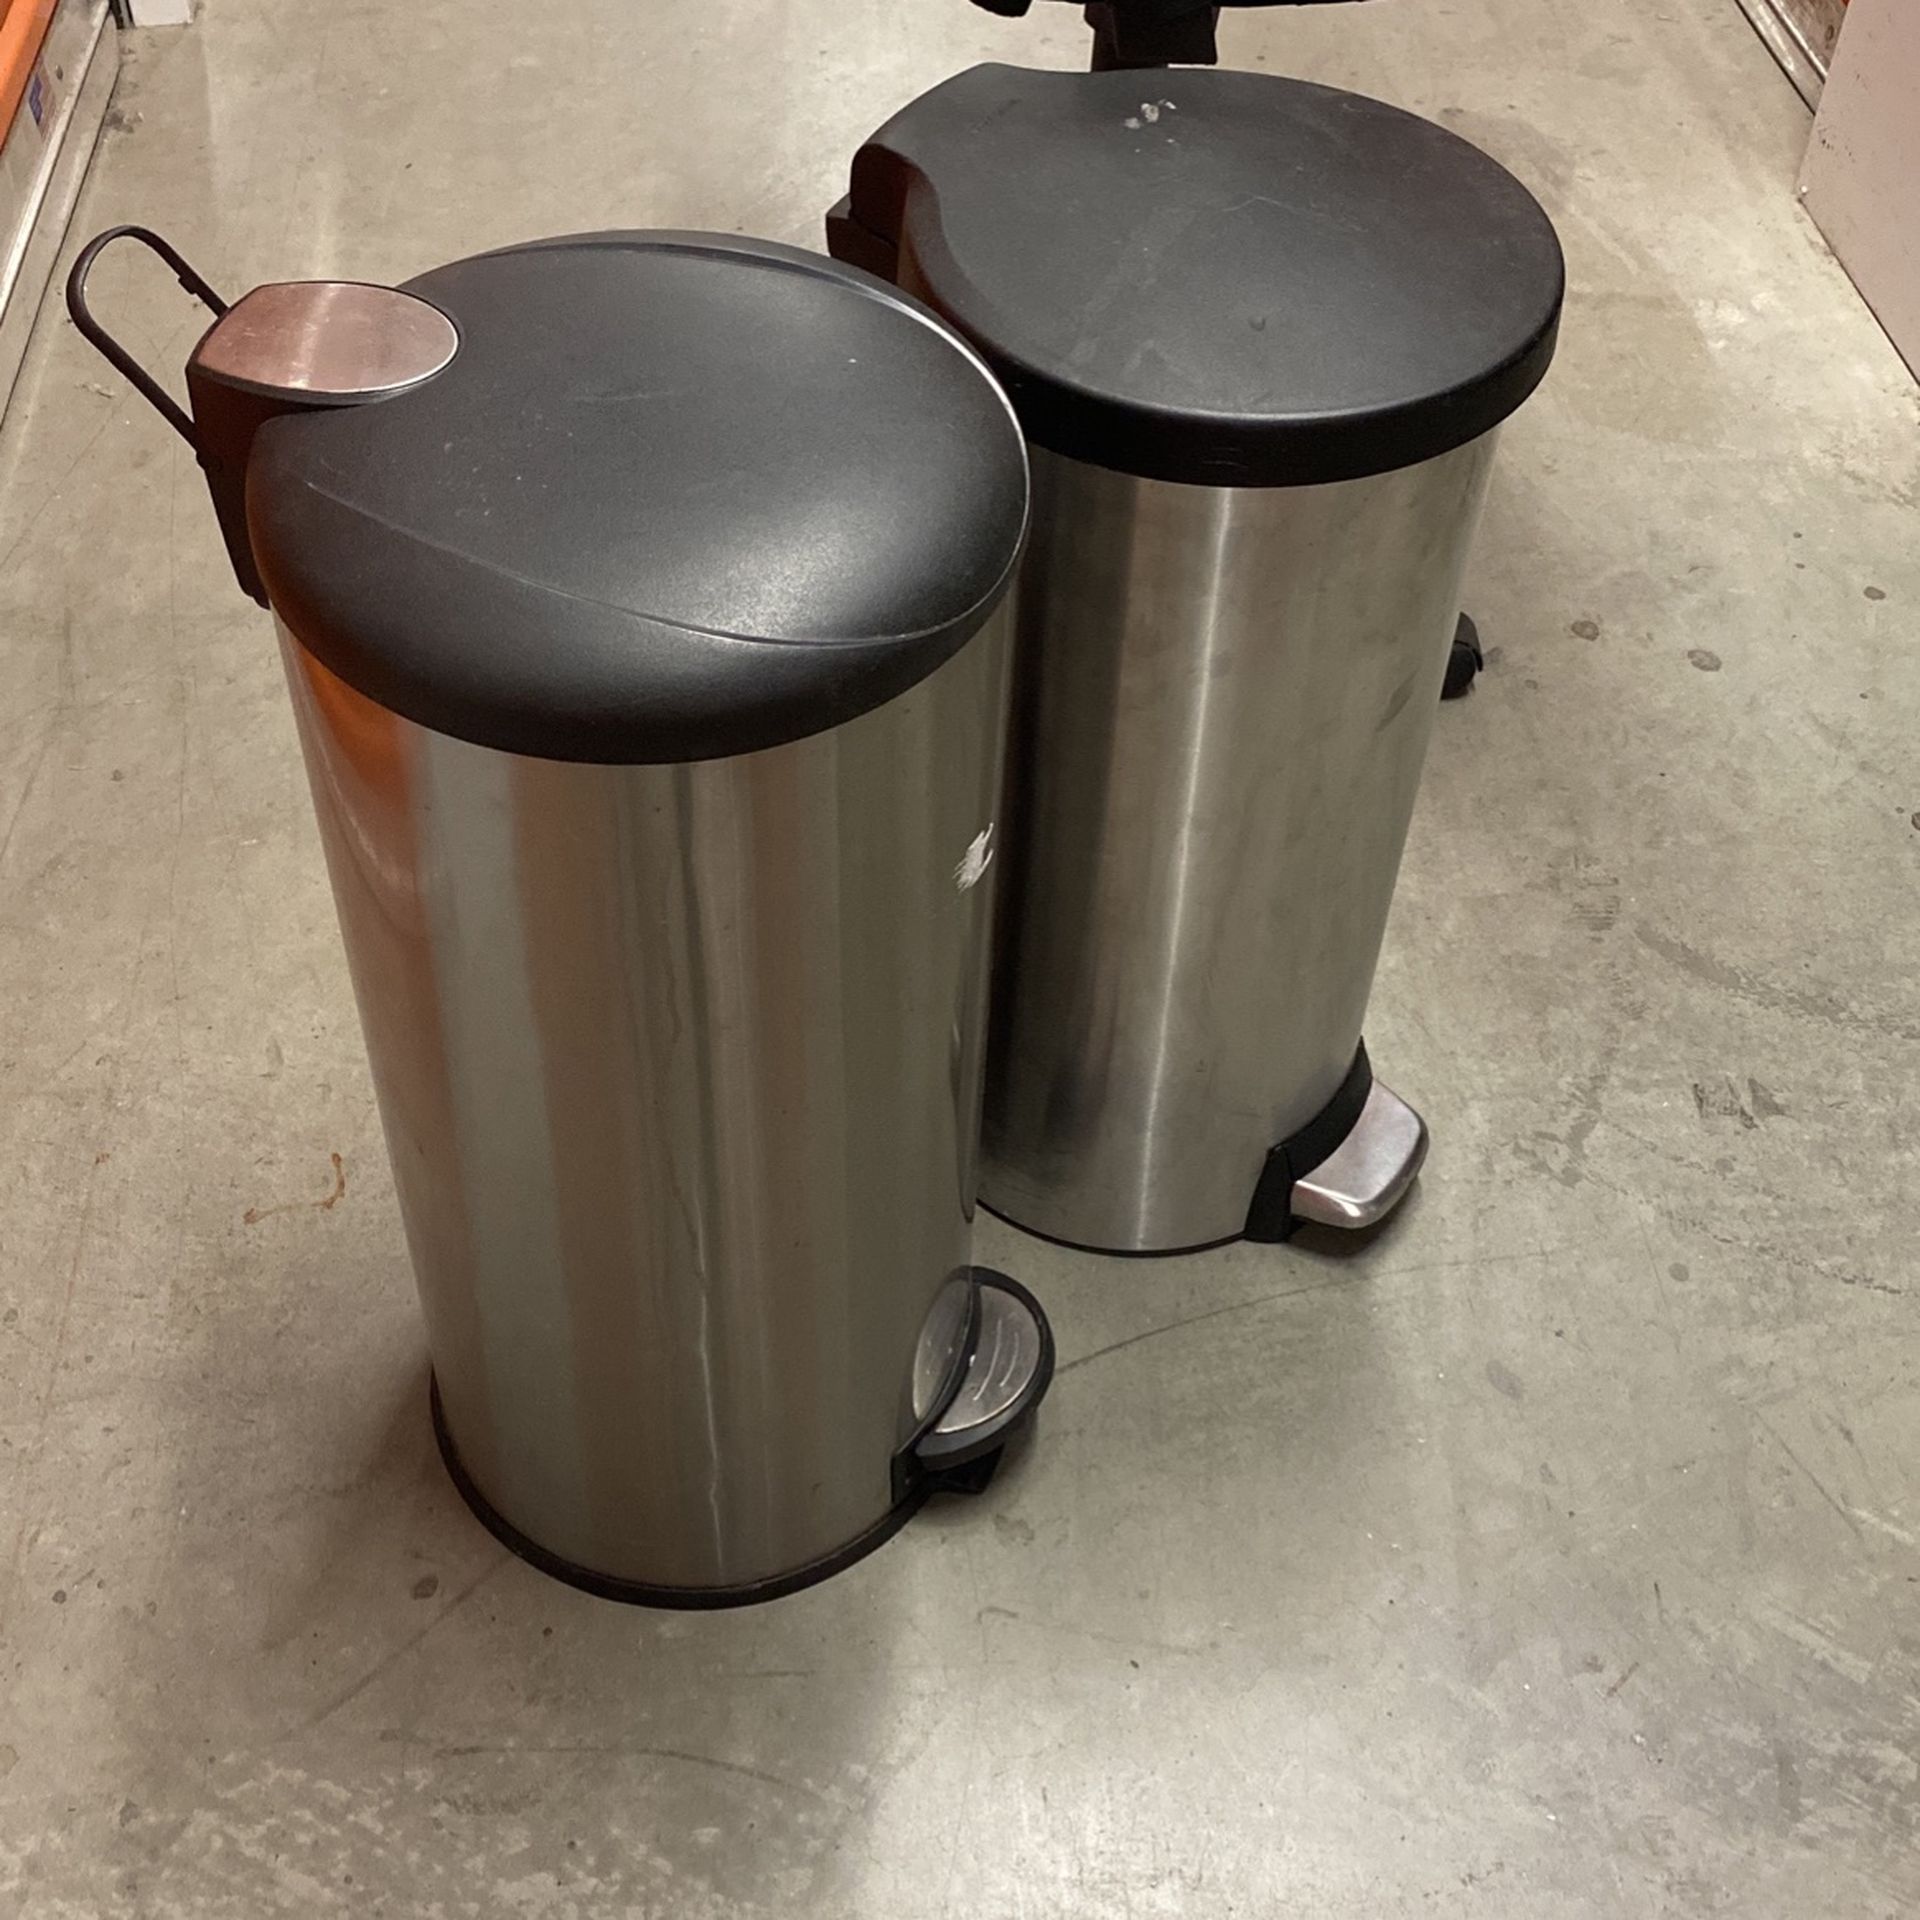 2x Stainless Steel Trash Cans